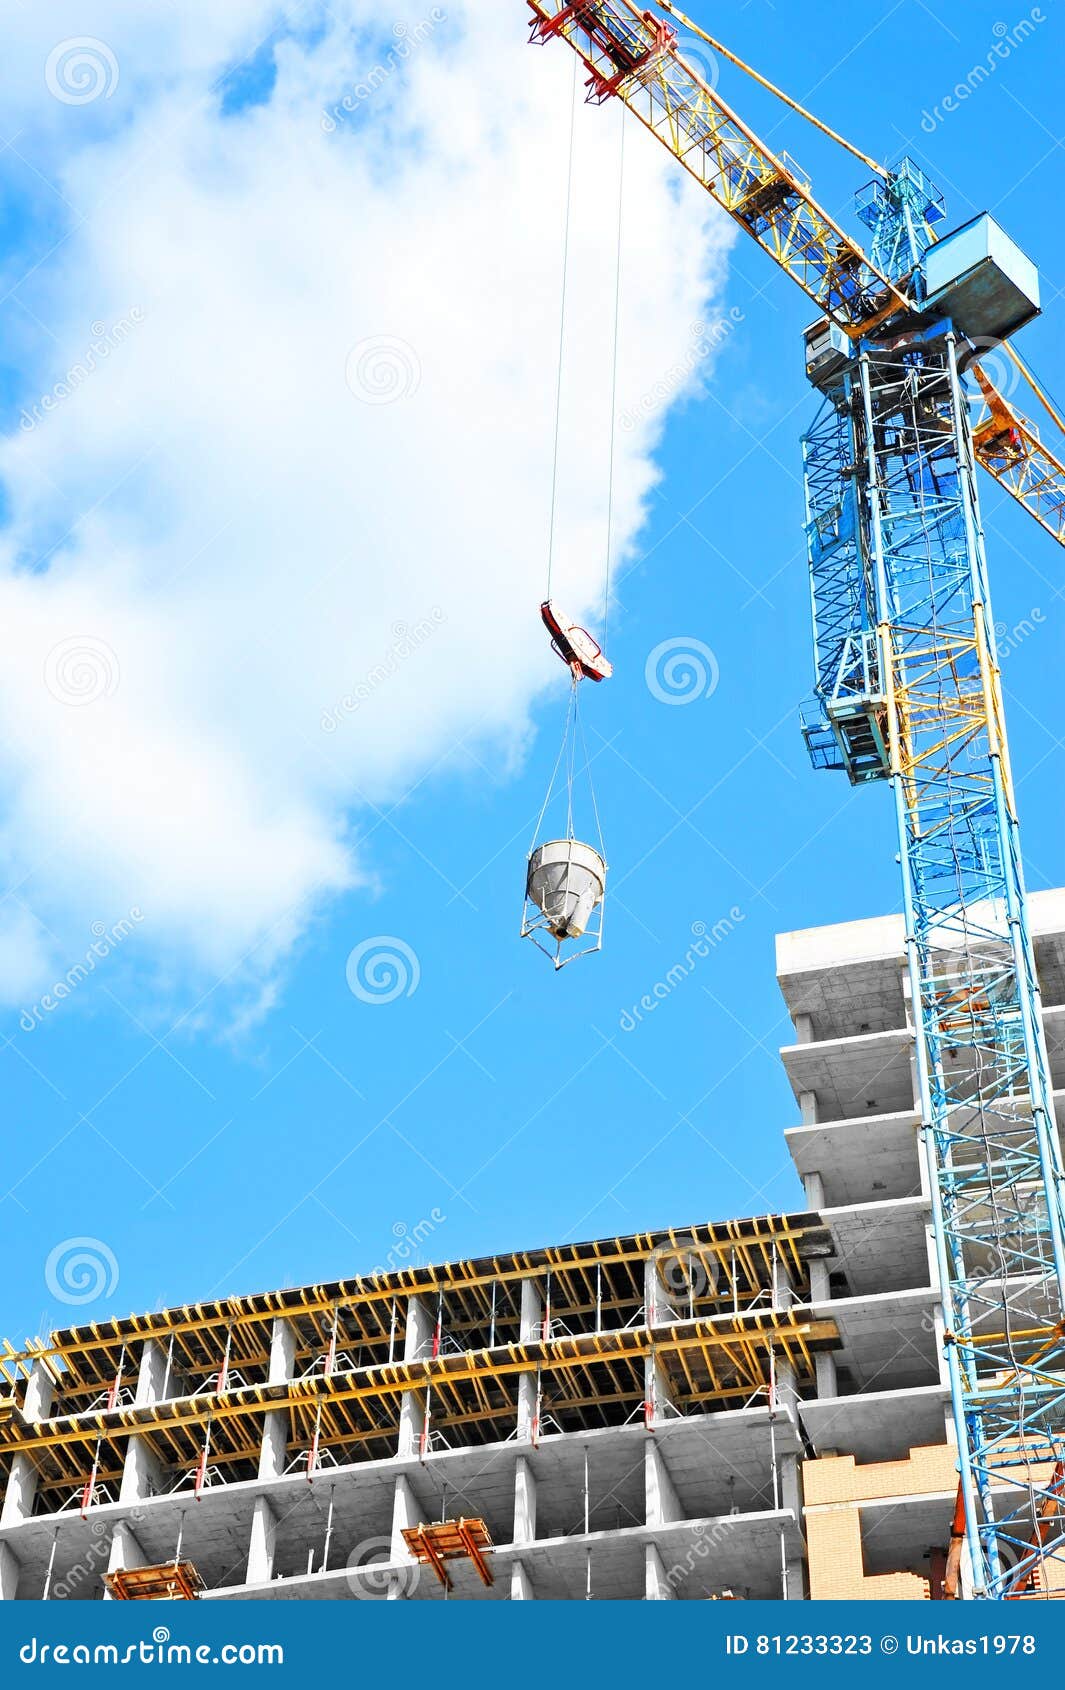 Crane Lifting Cement Mixing Container Stock Image - Image of lift